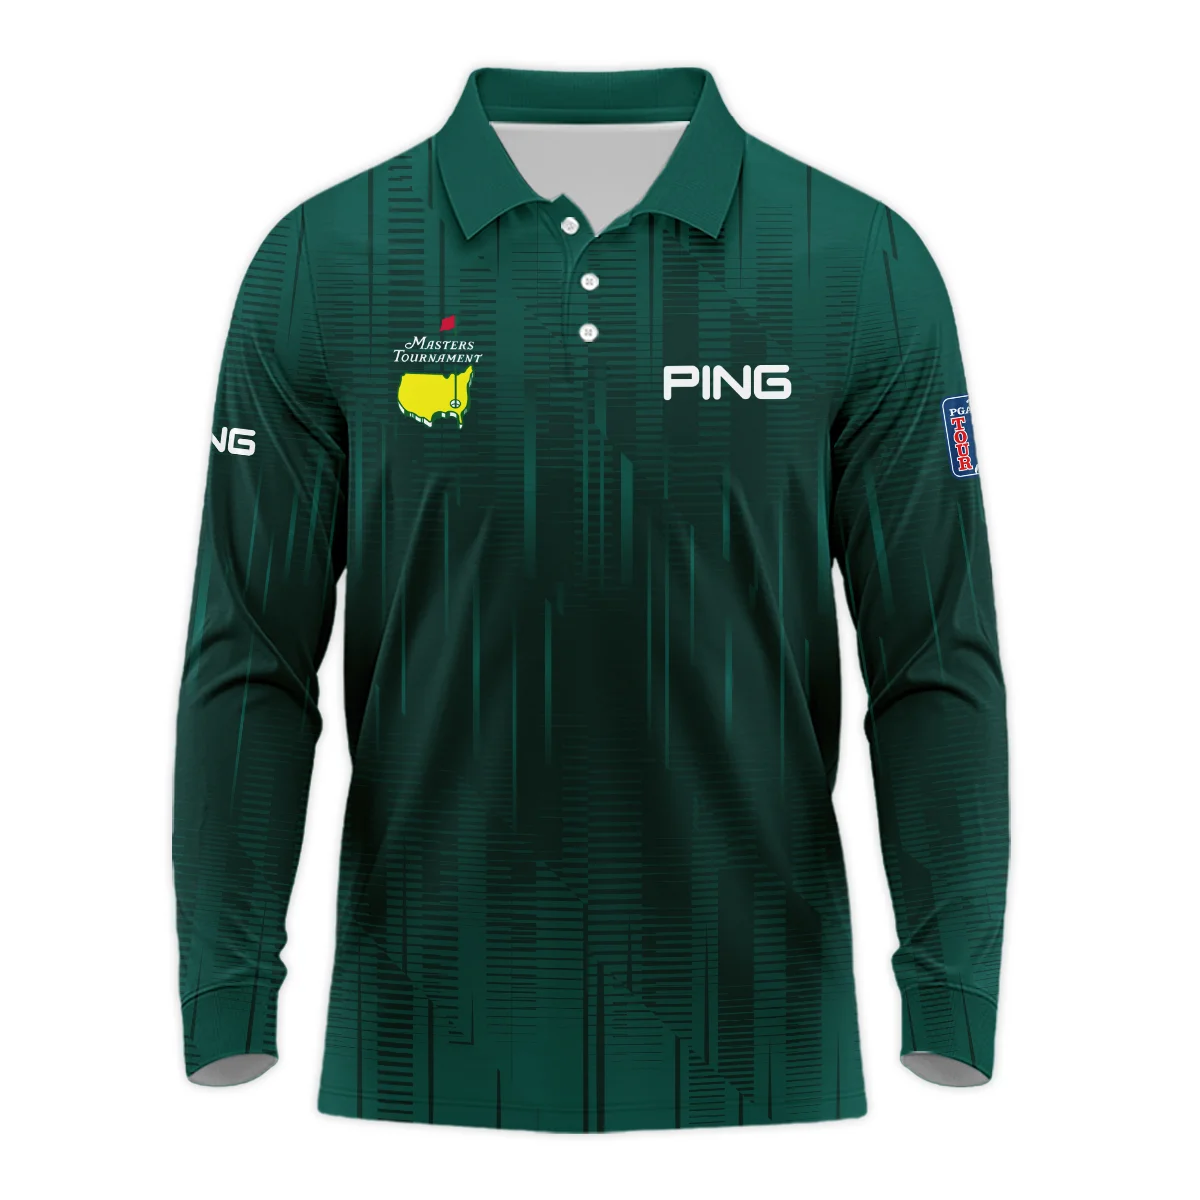 Masters Tournament Ping Dark Green Gradient Stripes Pattern Polo Shirt Style Classic Polo Shirt For Men